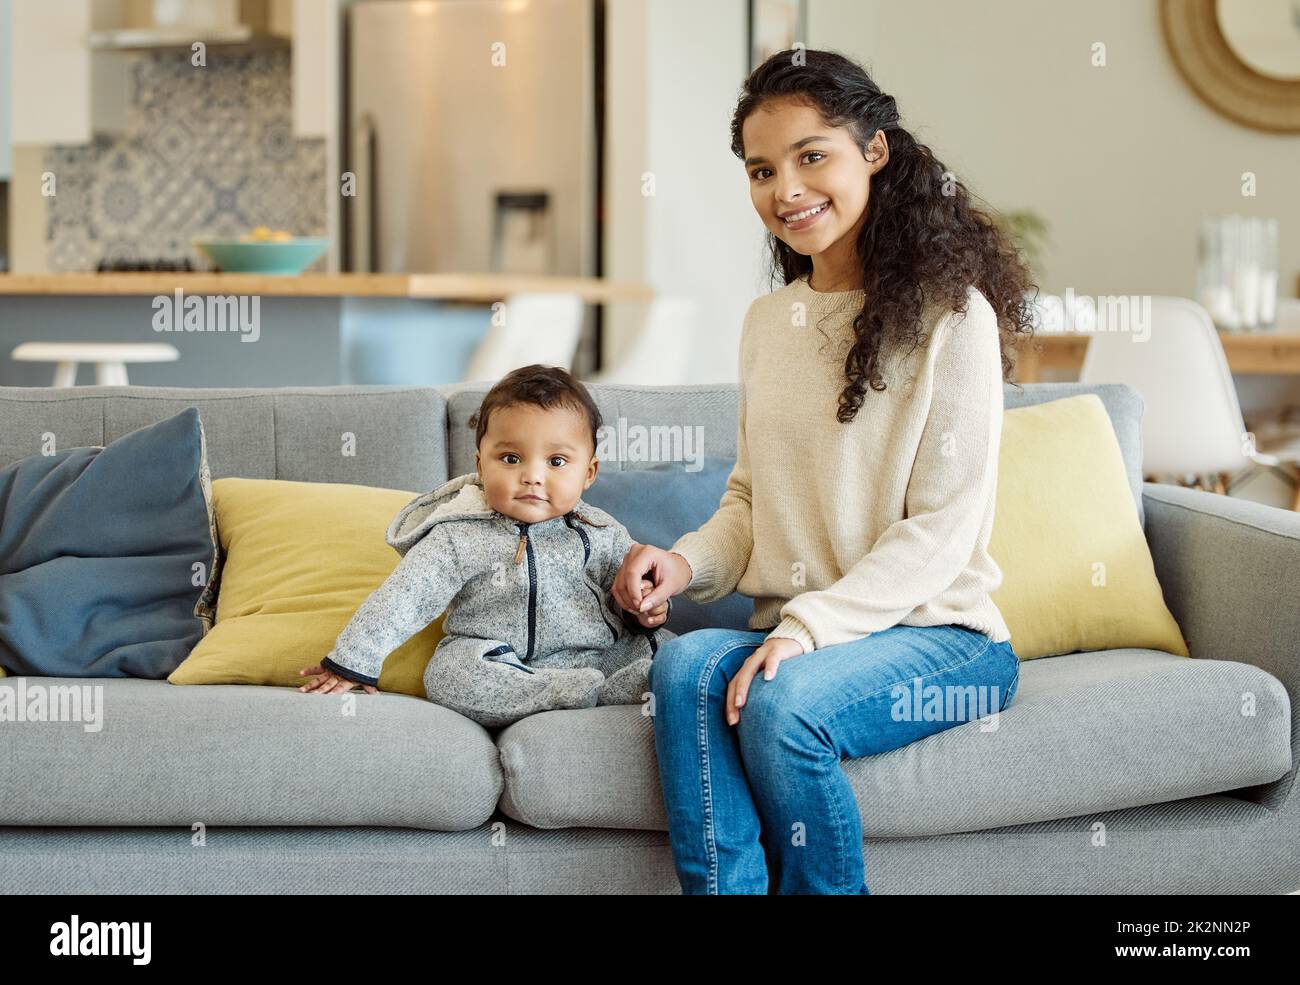 Hes the sweetest little boy. Shot of a young mother bonding with her baby boy on the sofa at home. Stock Photo